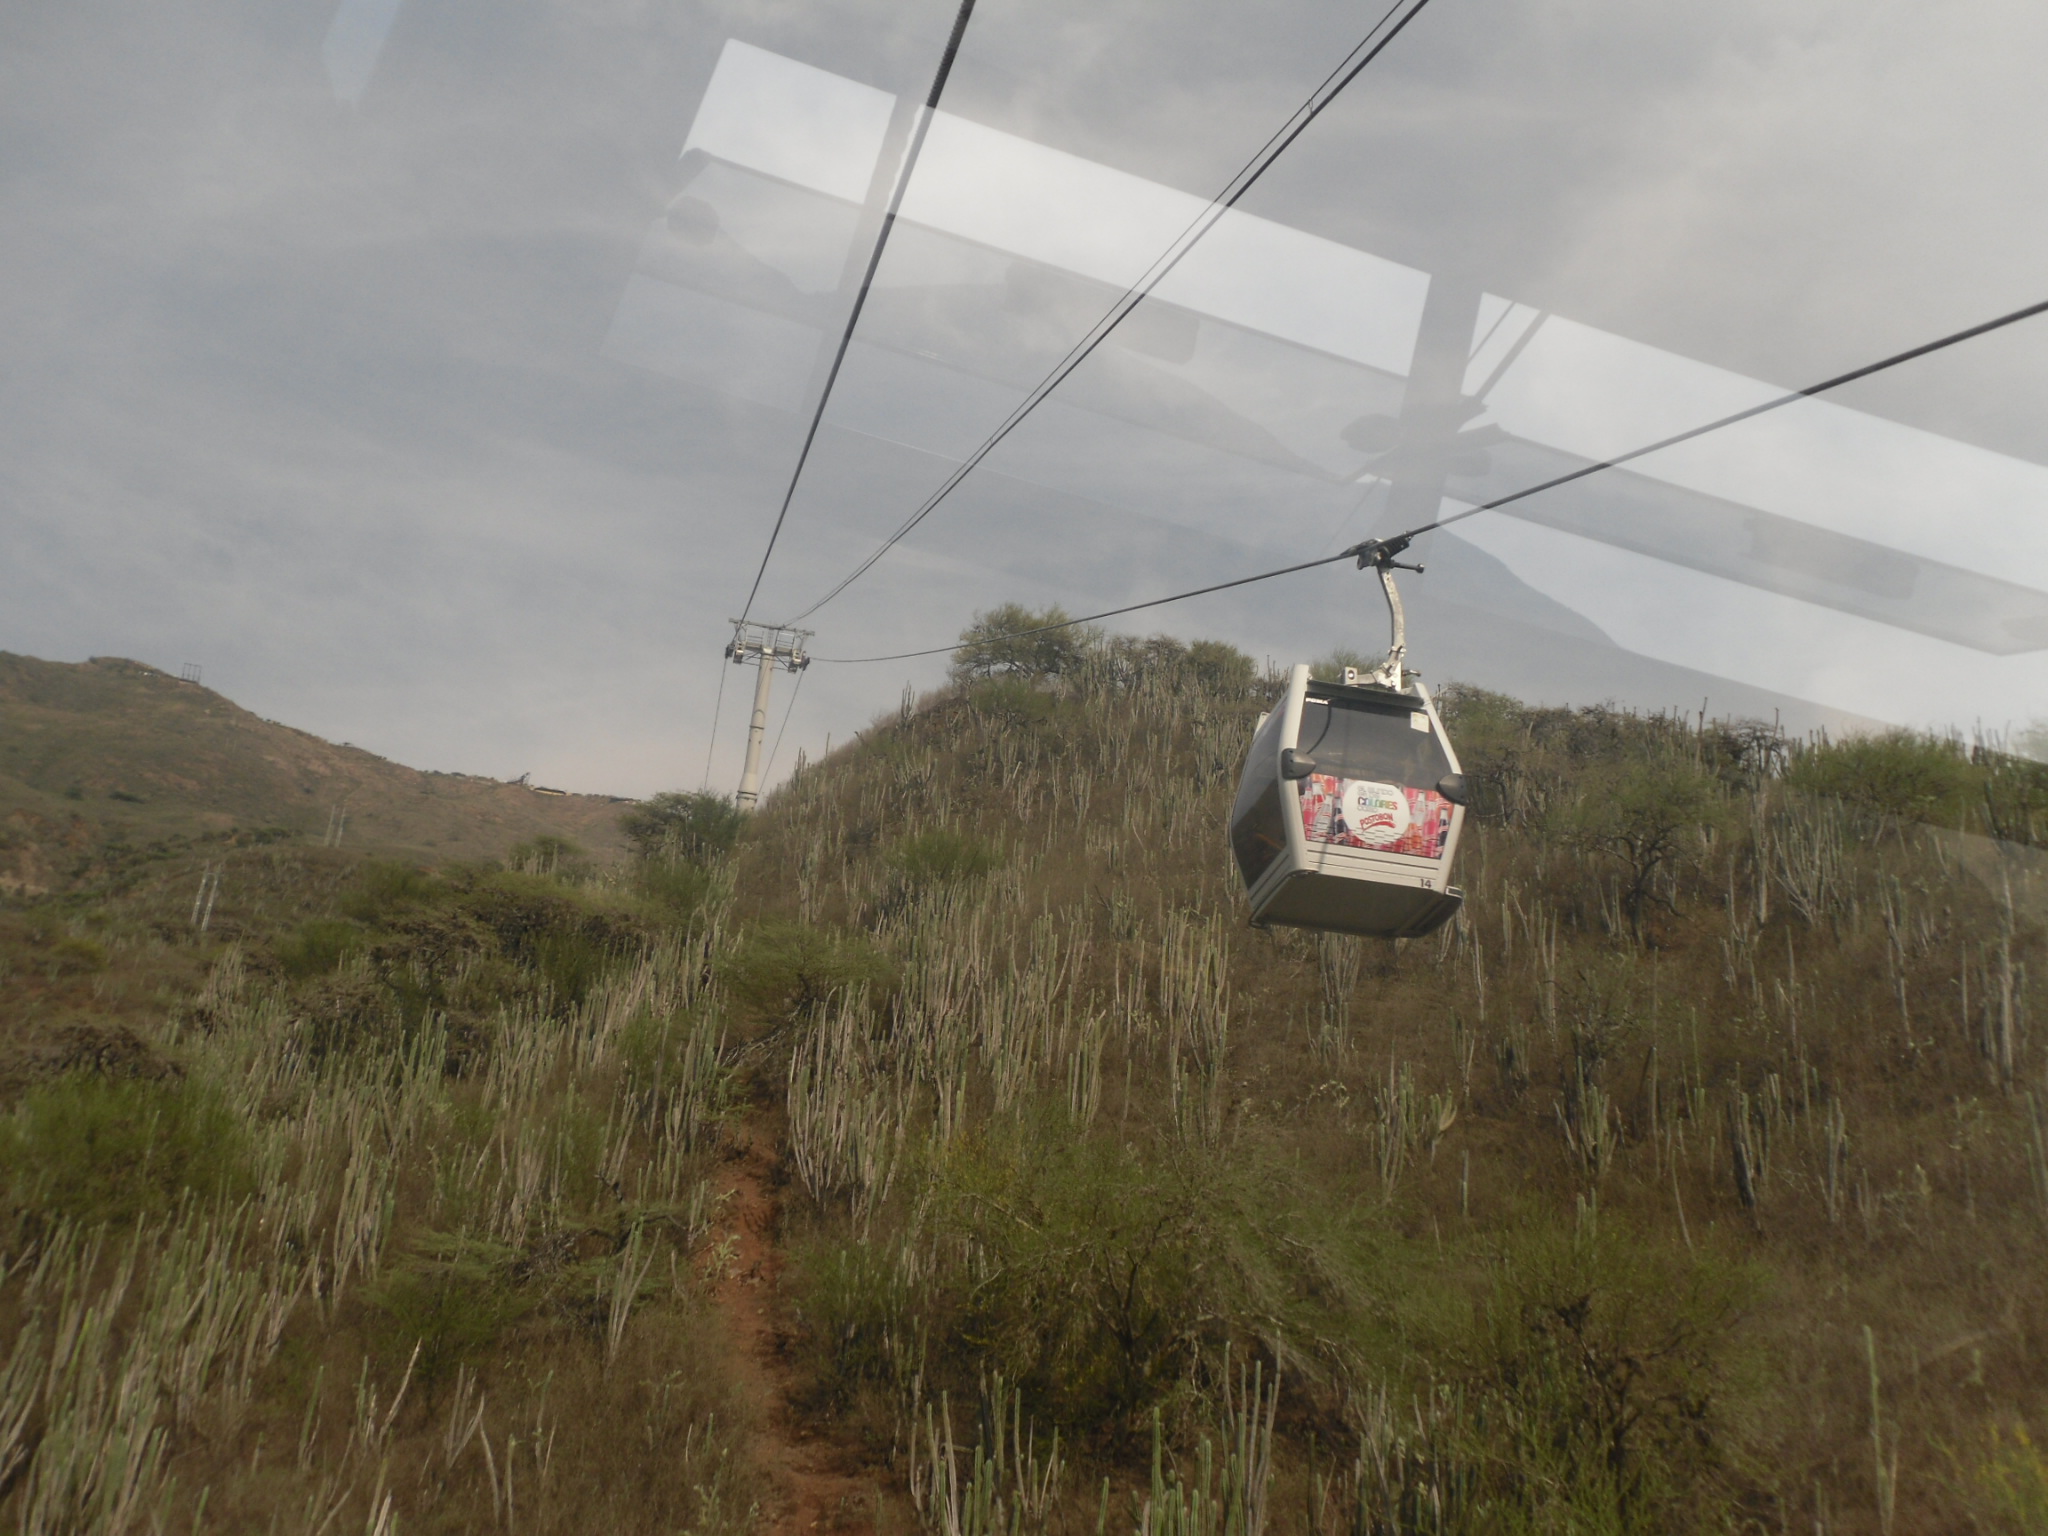 Tram ride in the Chicamocha canyon enroute to Barichara Colombia